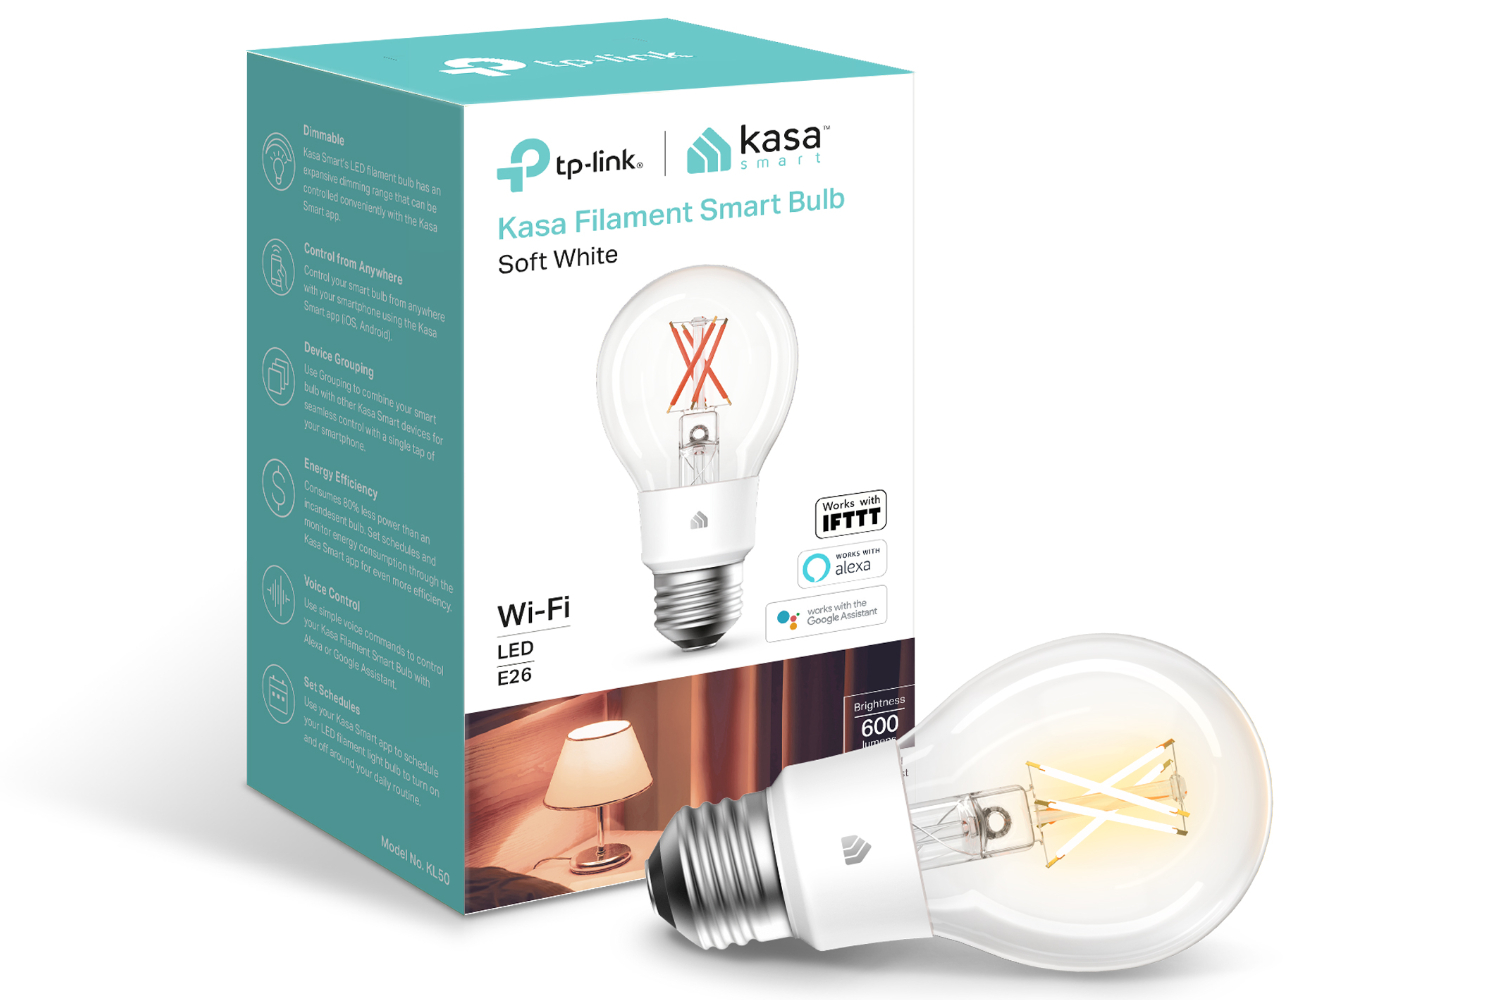 kasa smart lights are ready to party or give your home a vintage classic glow 19 kl50 packaging pr images  1